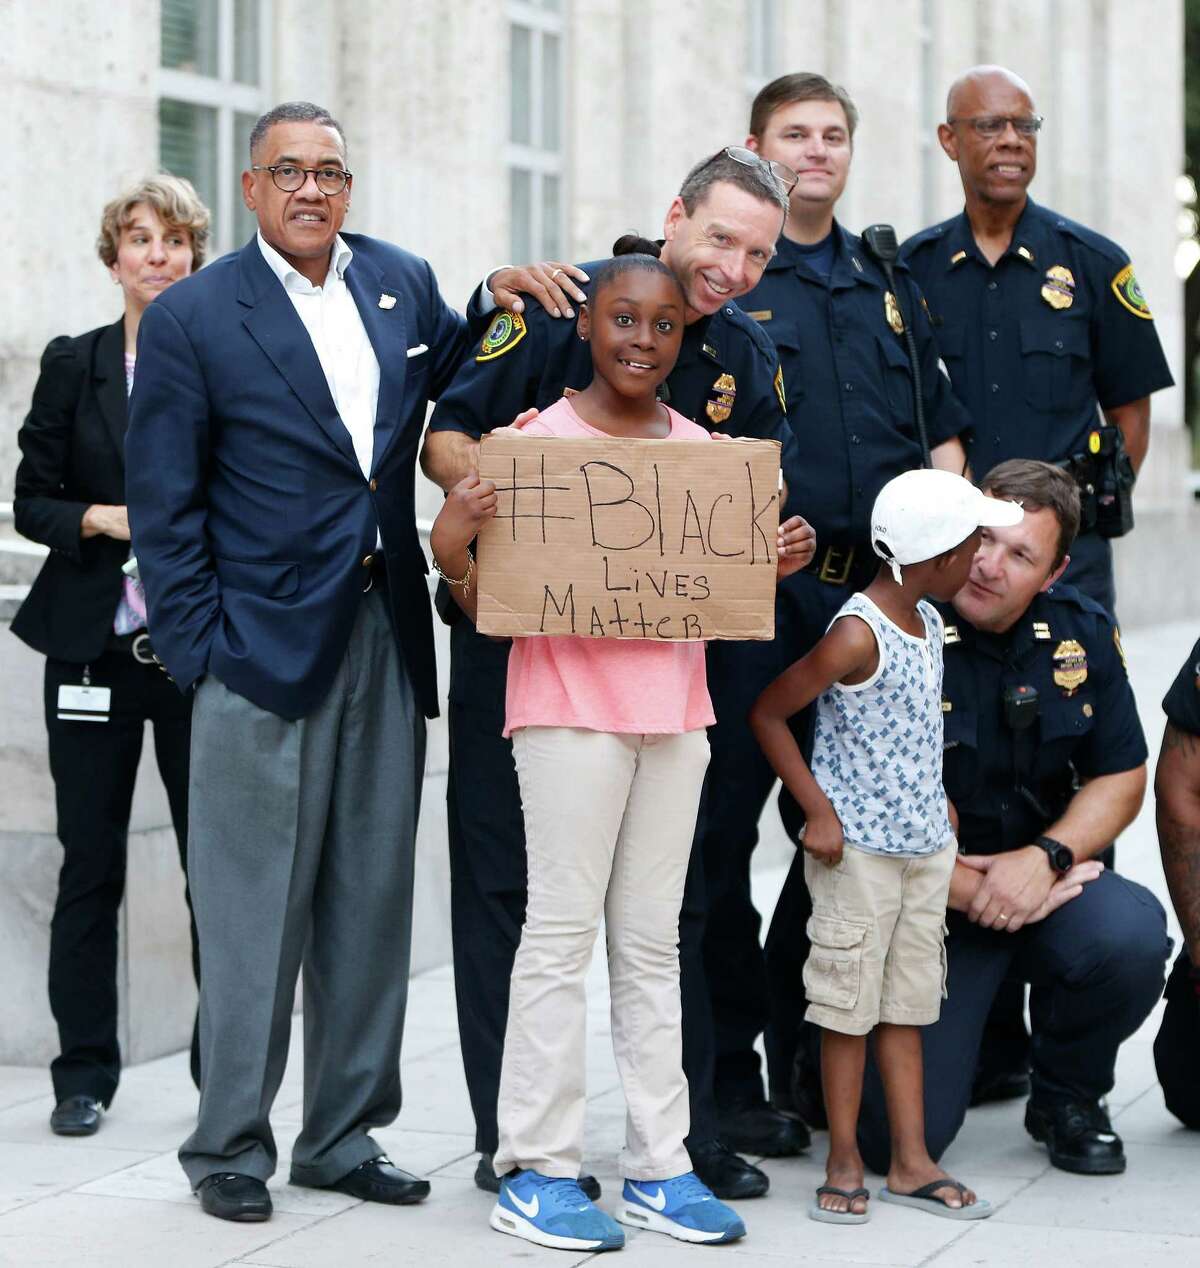 Houston police take photos with protesters during the rally that began at Discovery Green and ended at City Hall on Friday.